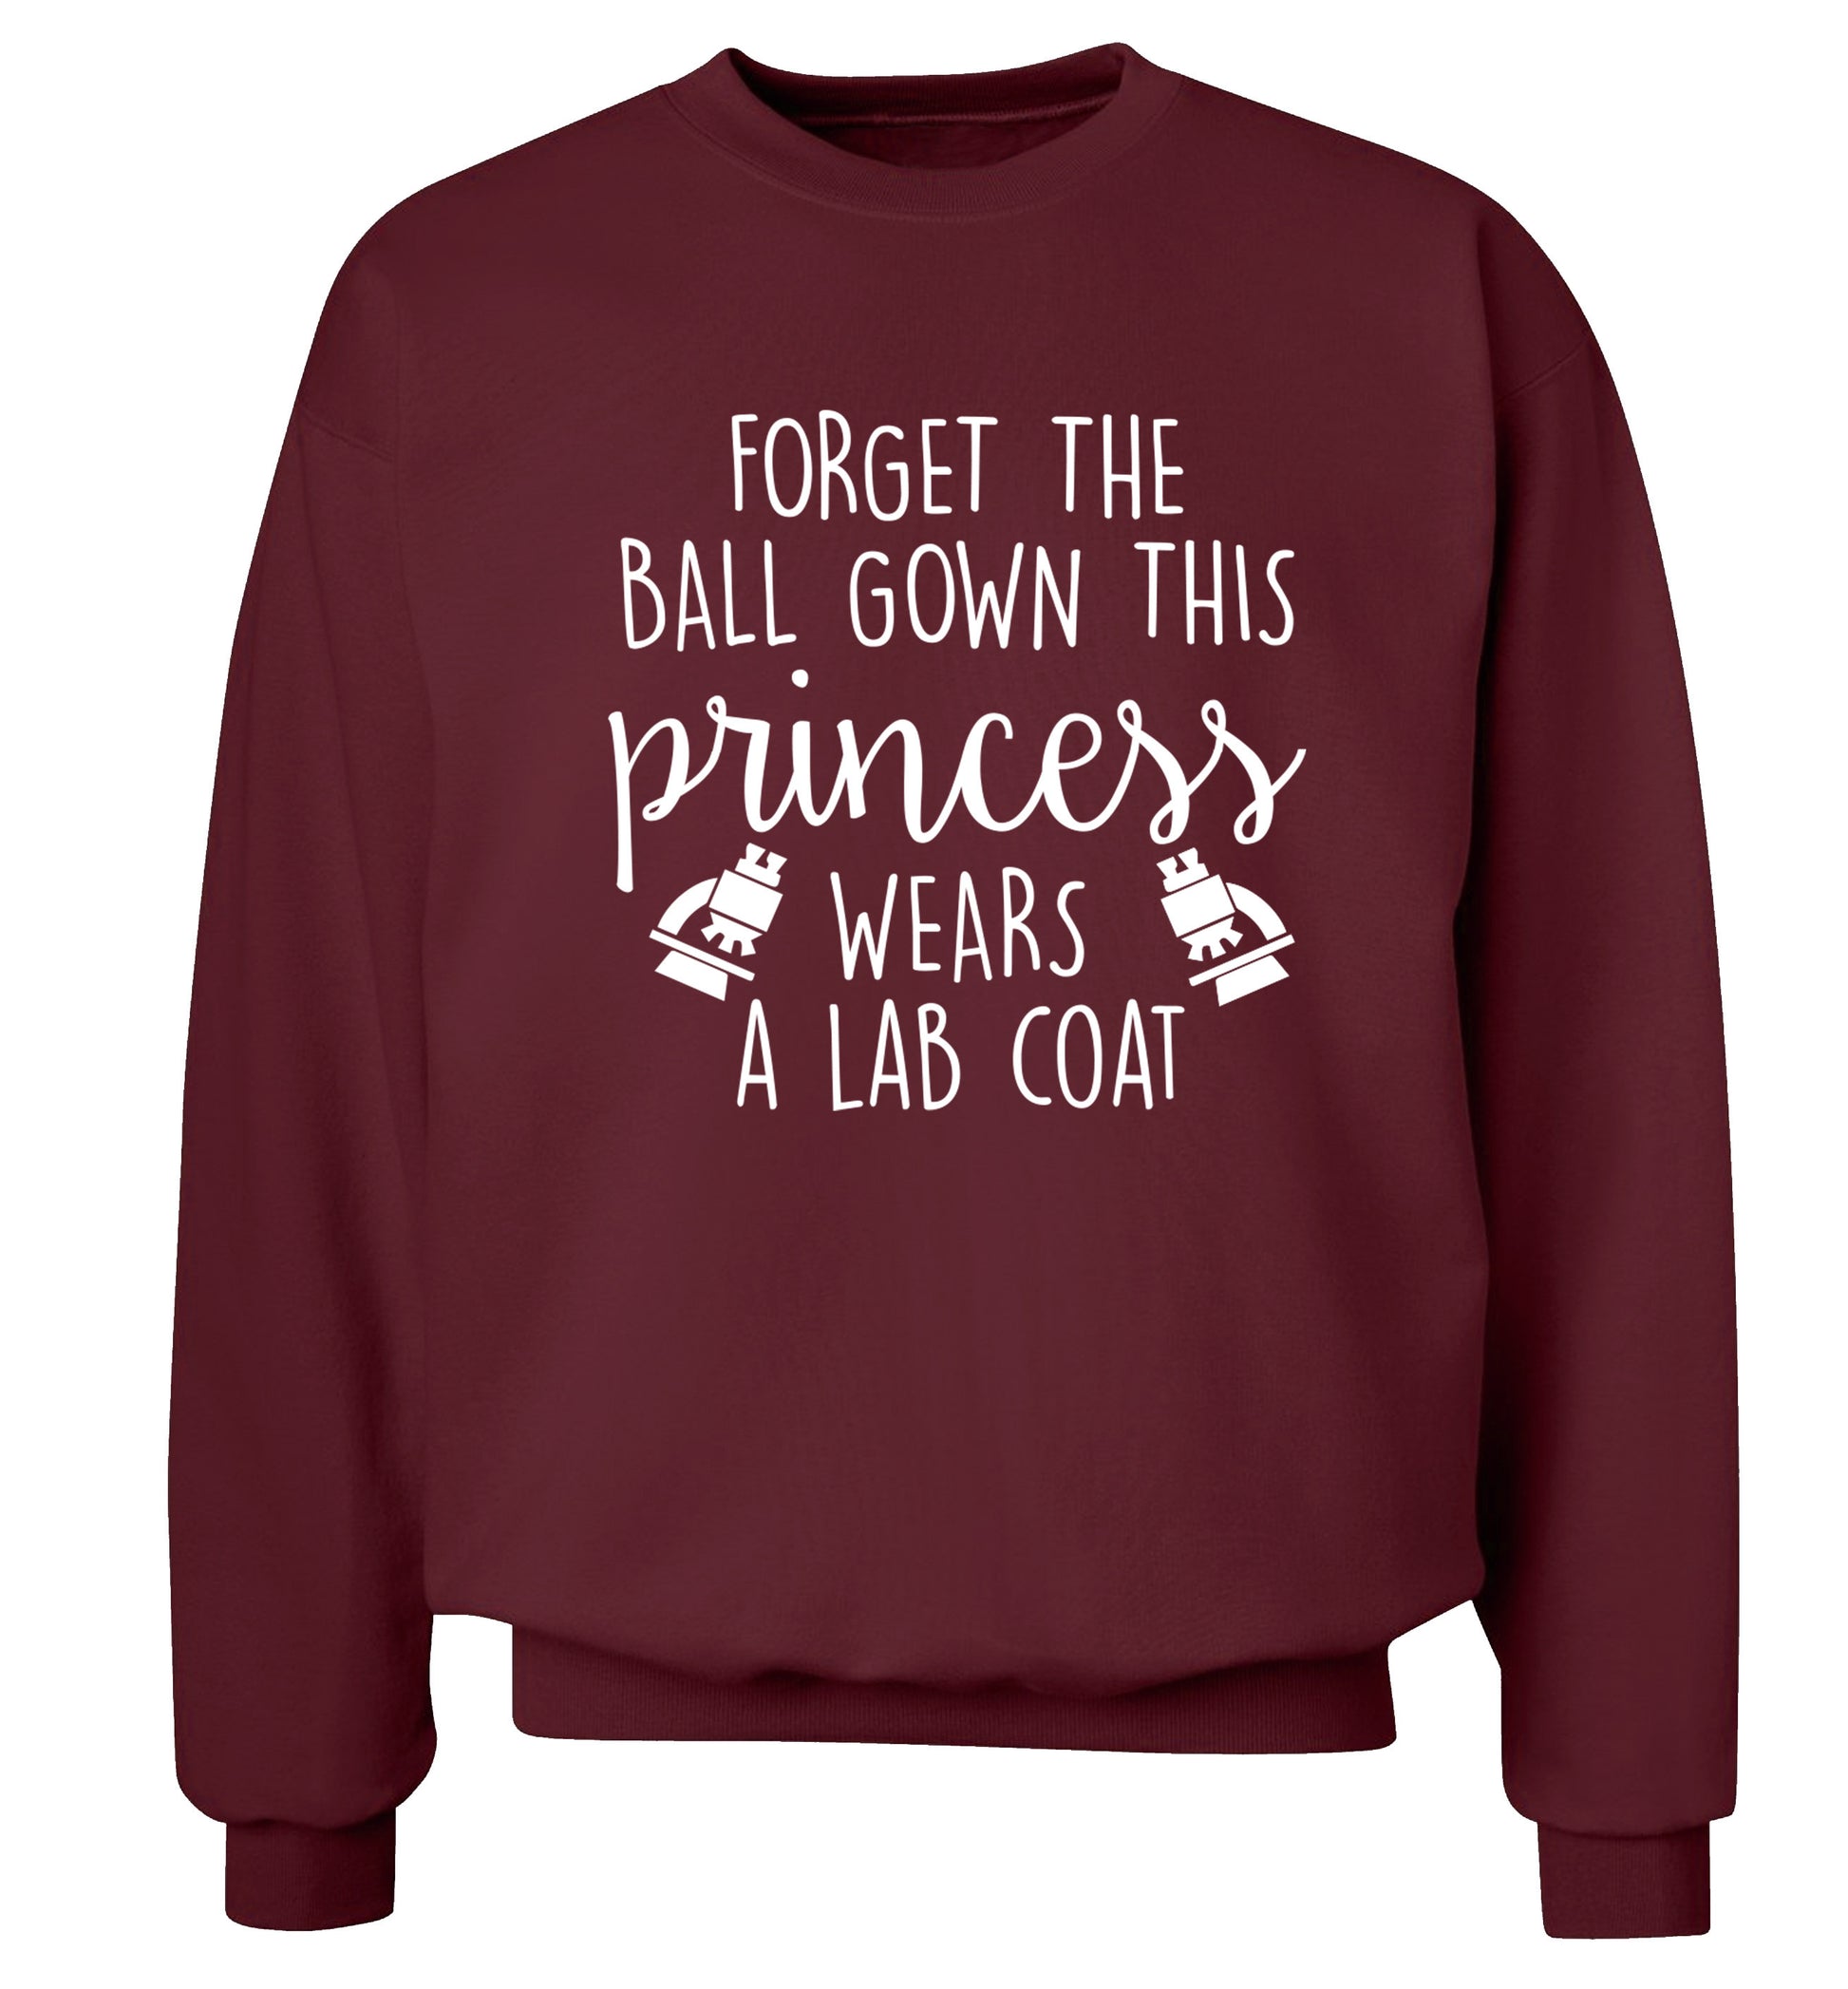 Forget the ball gown this princess wears a lab coat Adult's unisex maroon Sweater 2XL